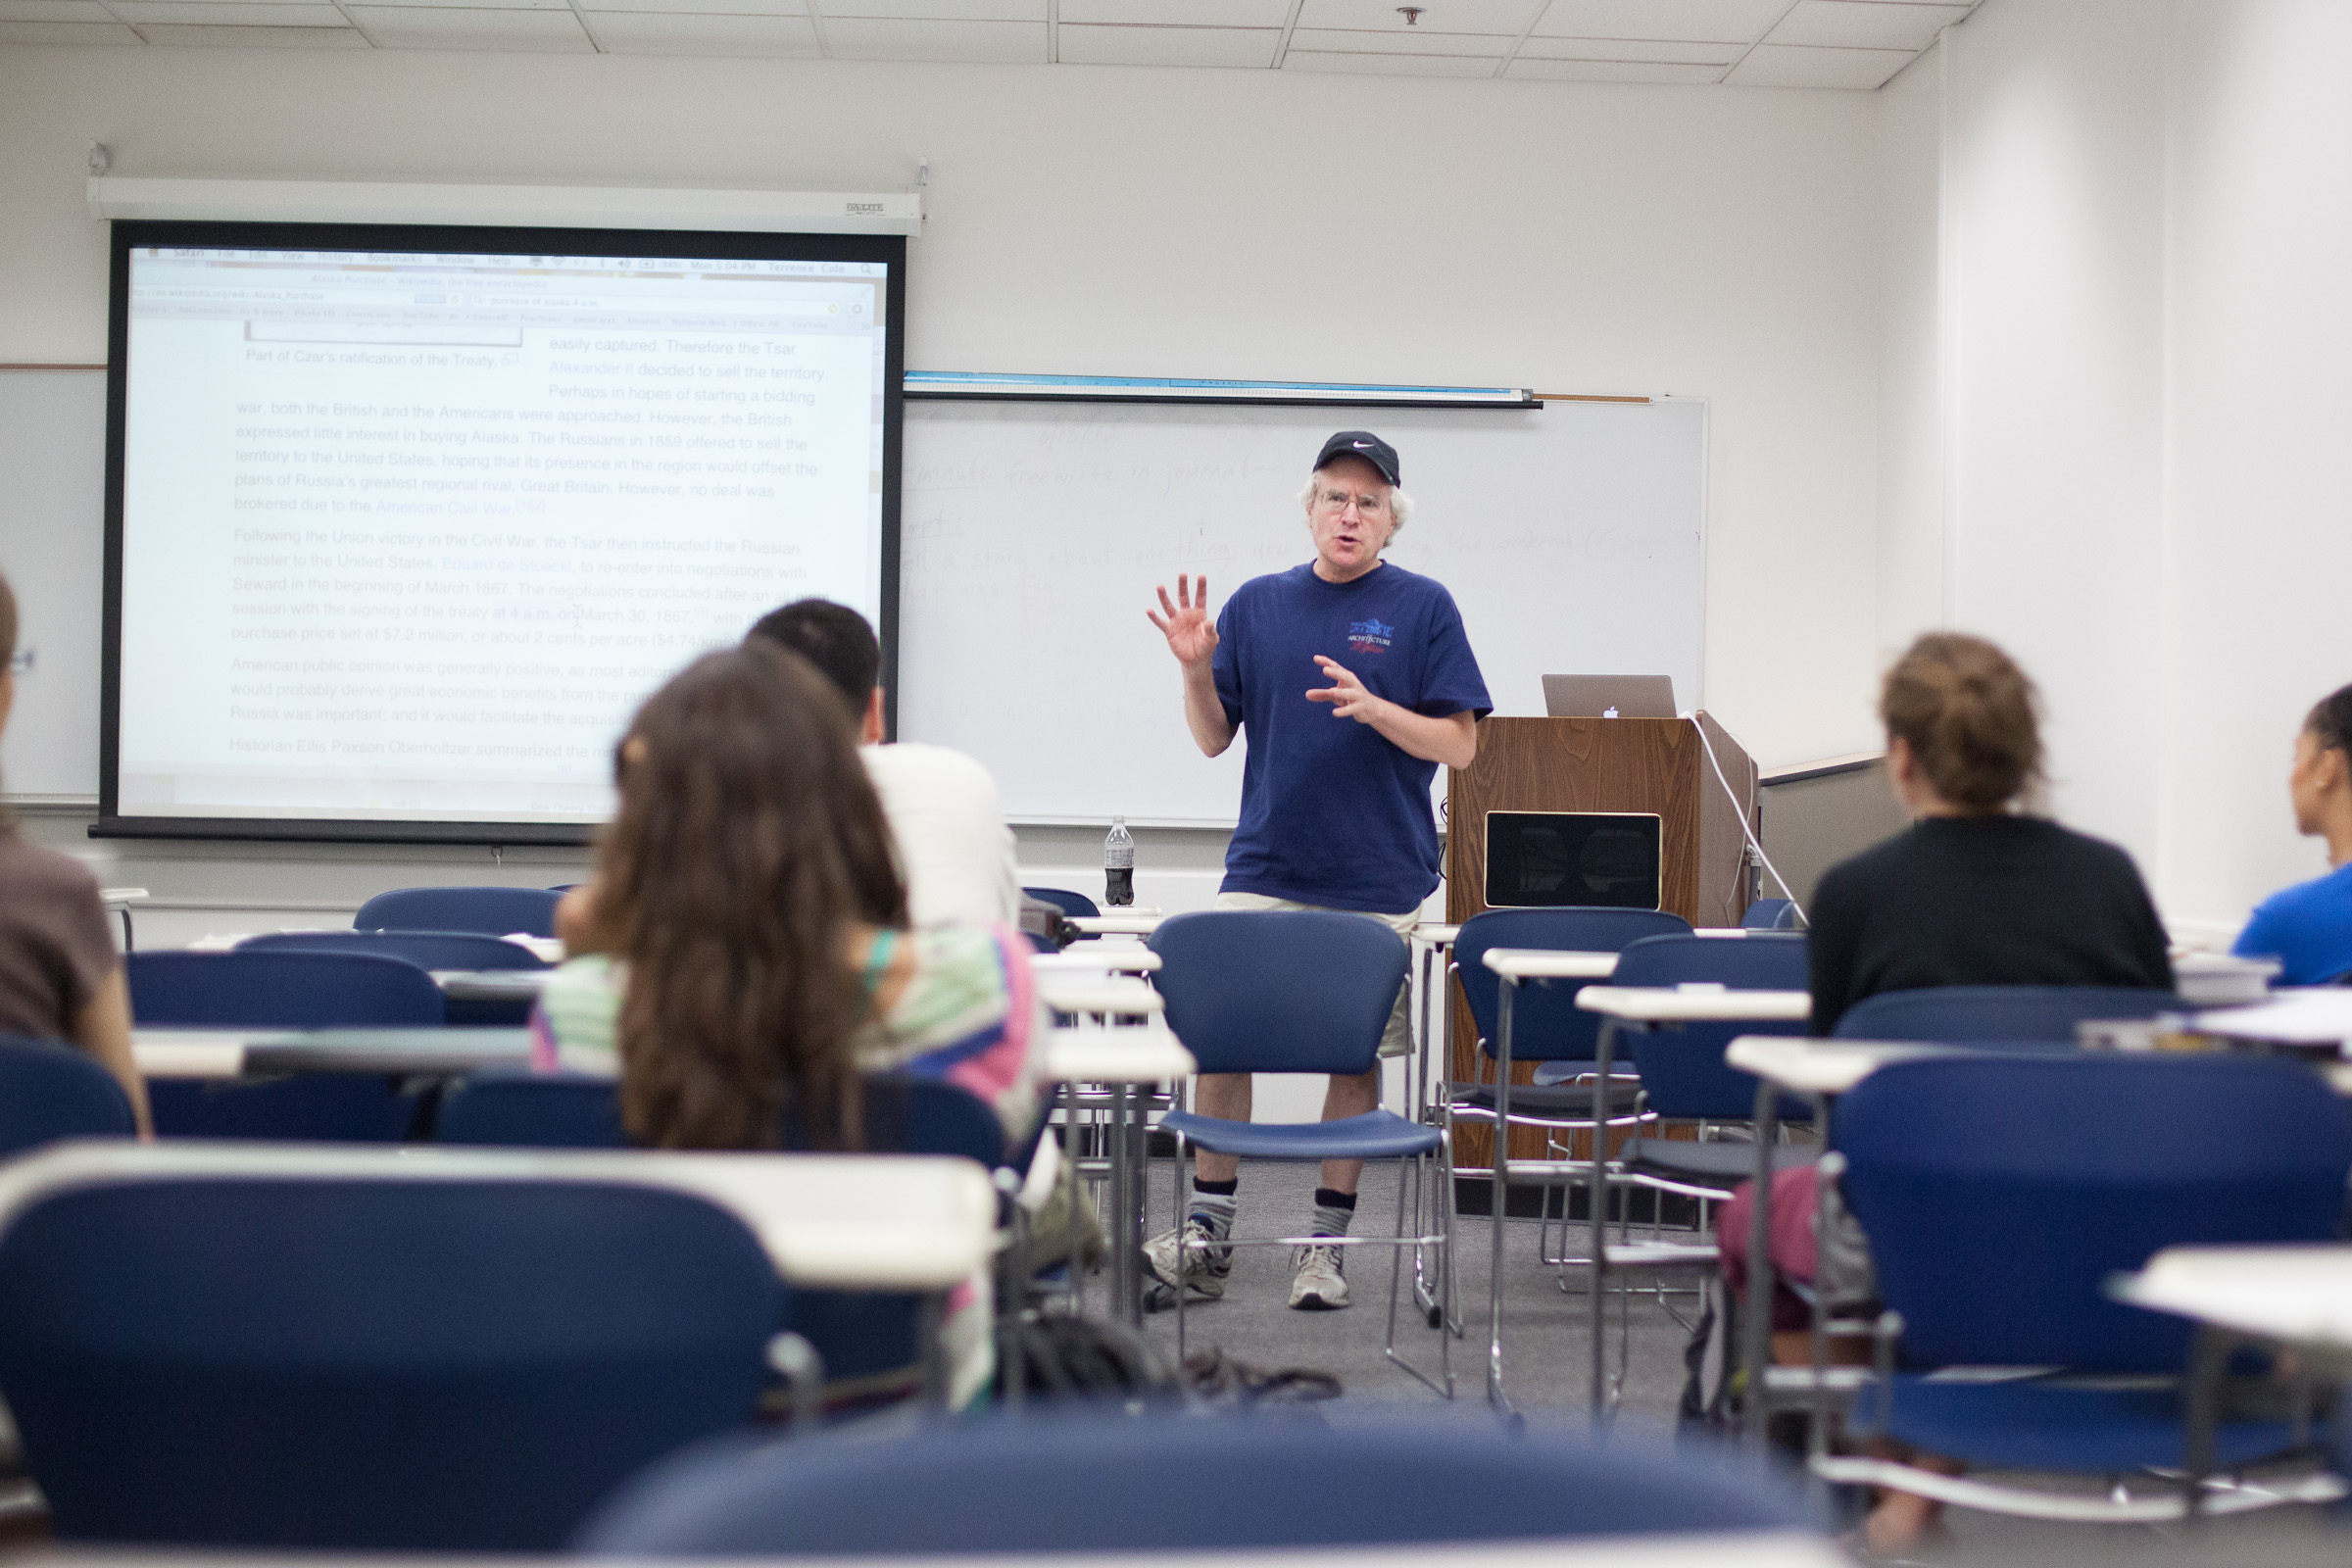 Professor Terrence Cole lectures on Alaska state history during UAF’s summer sessions.